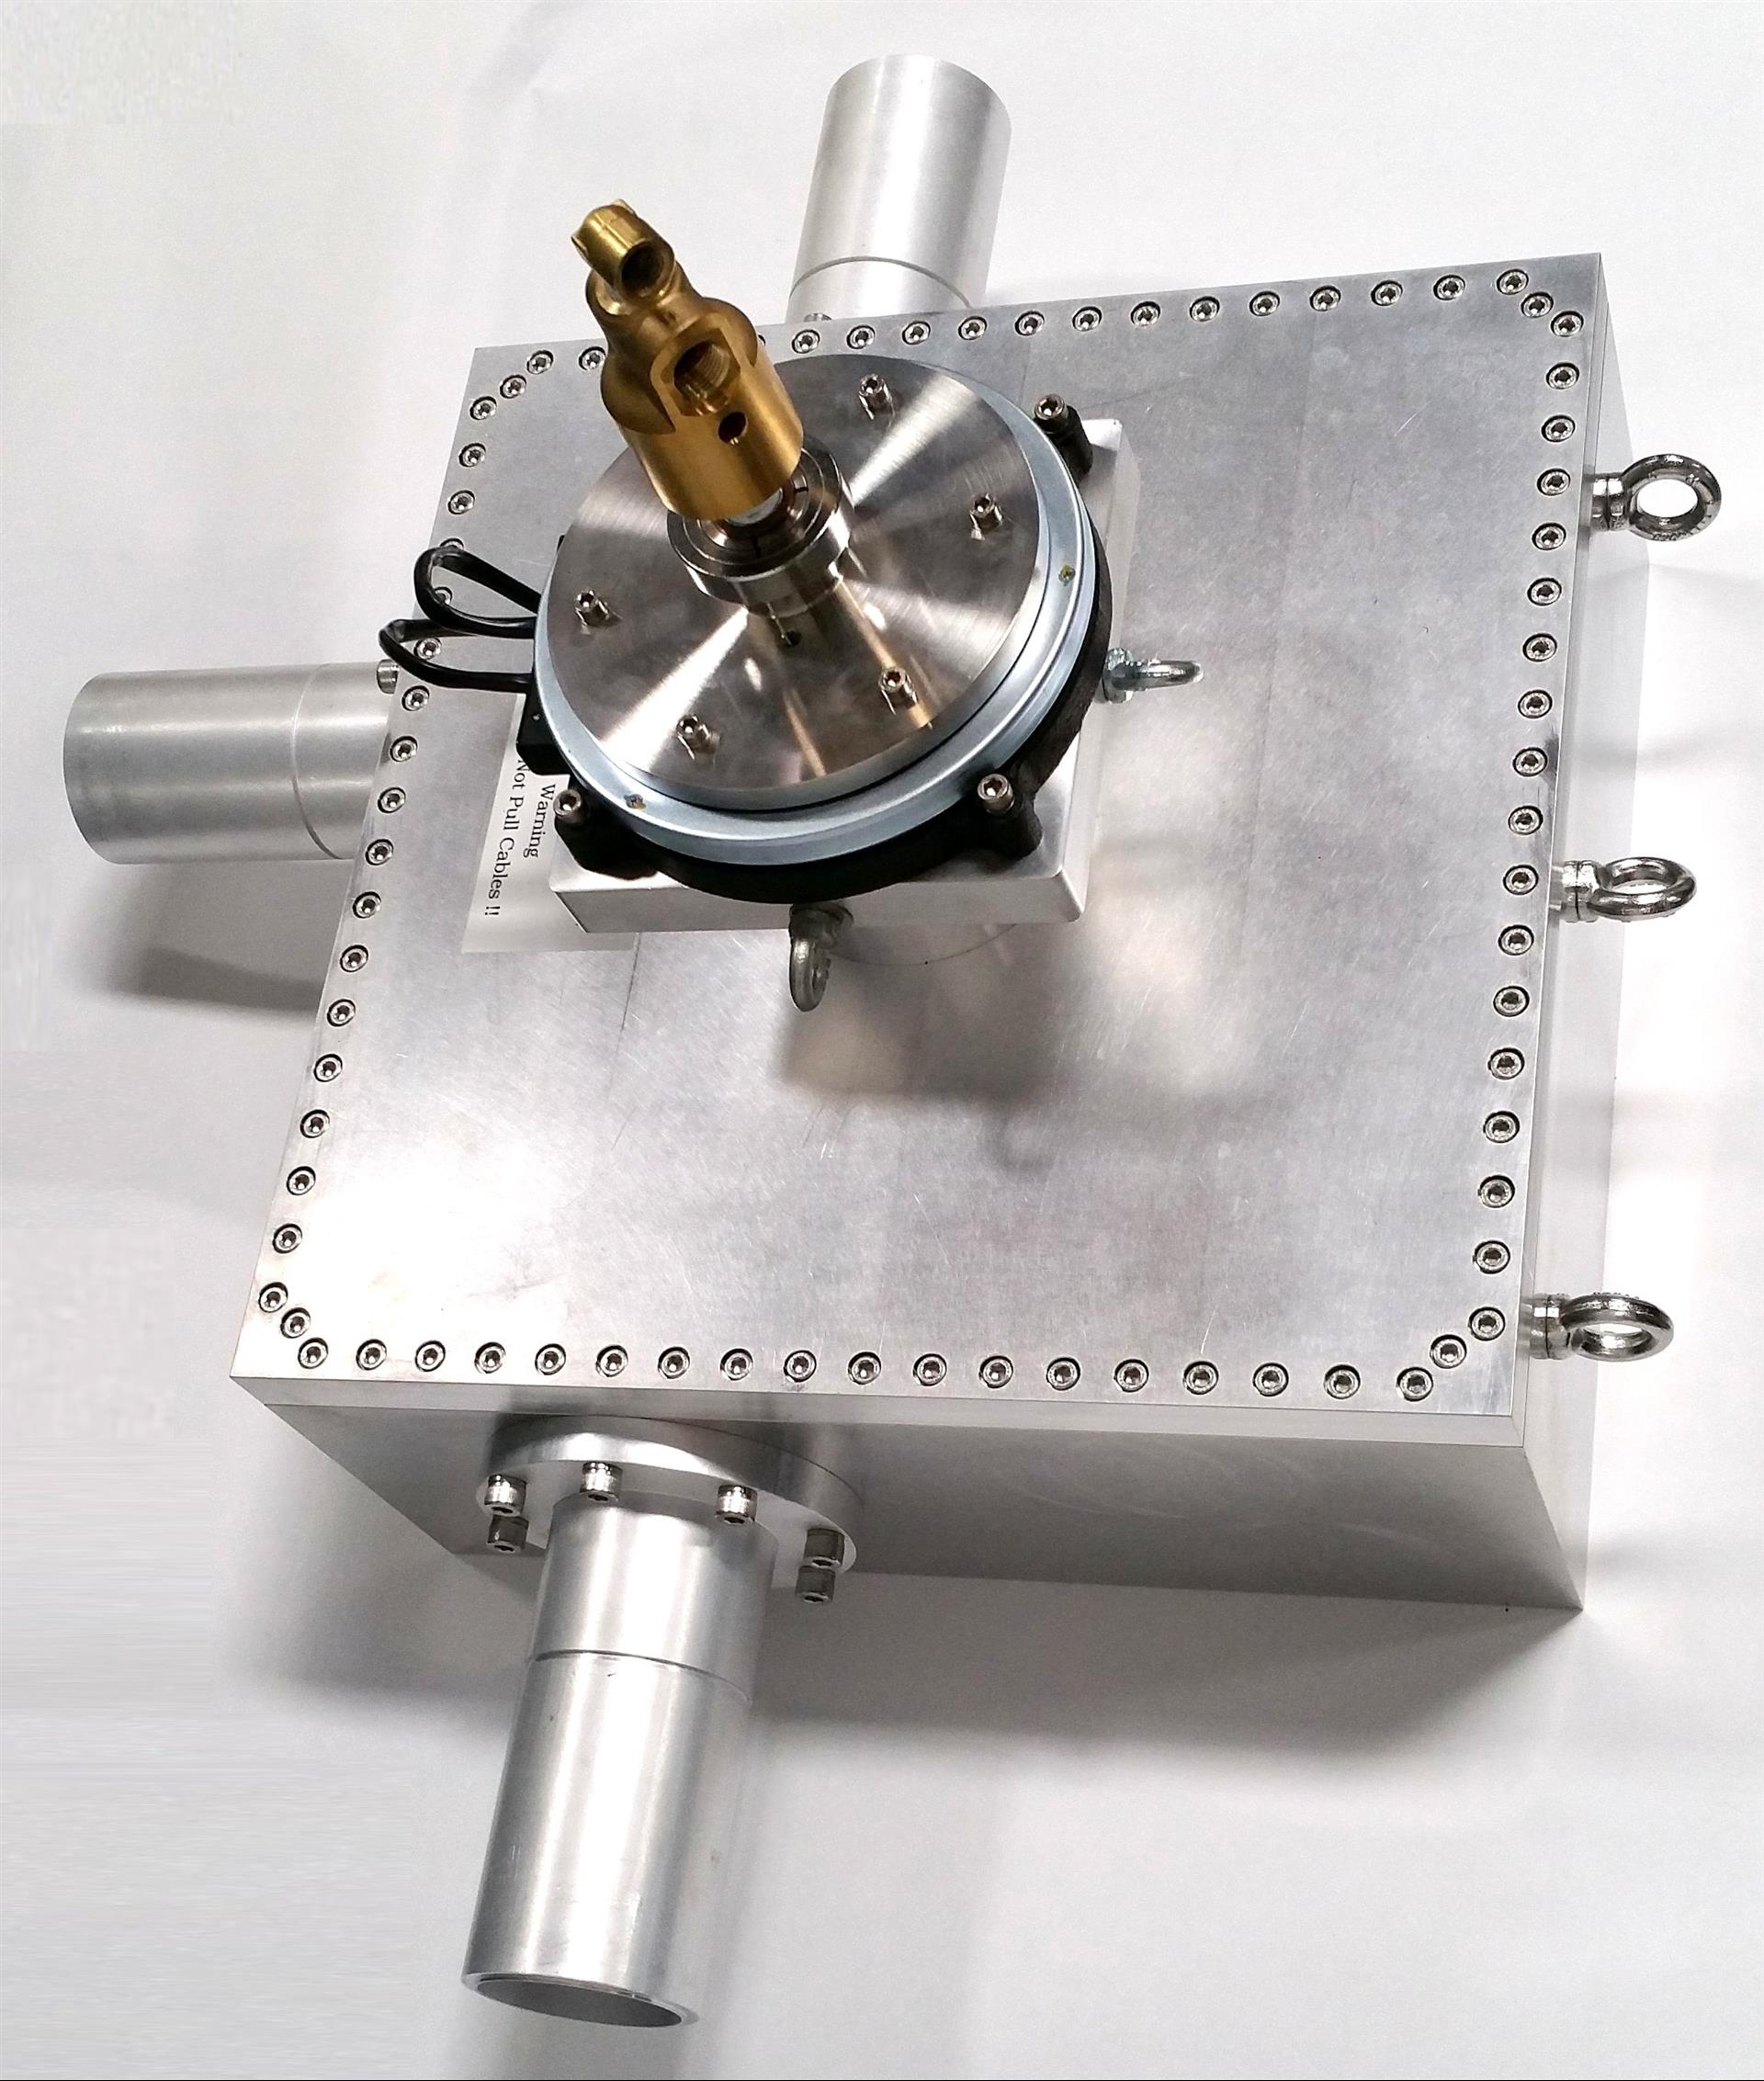 Rotary switch in 63.5-mm waveguide rated for 1.4 MW CW with water cooling